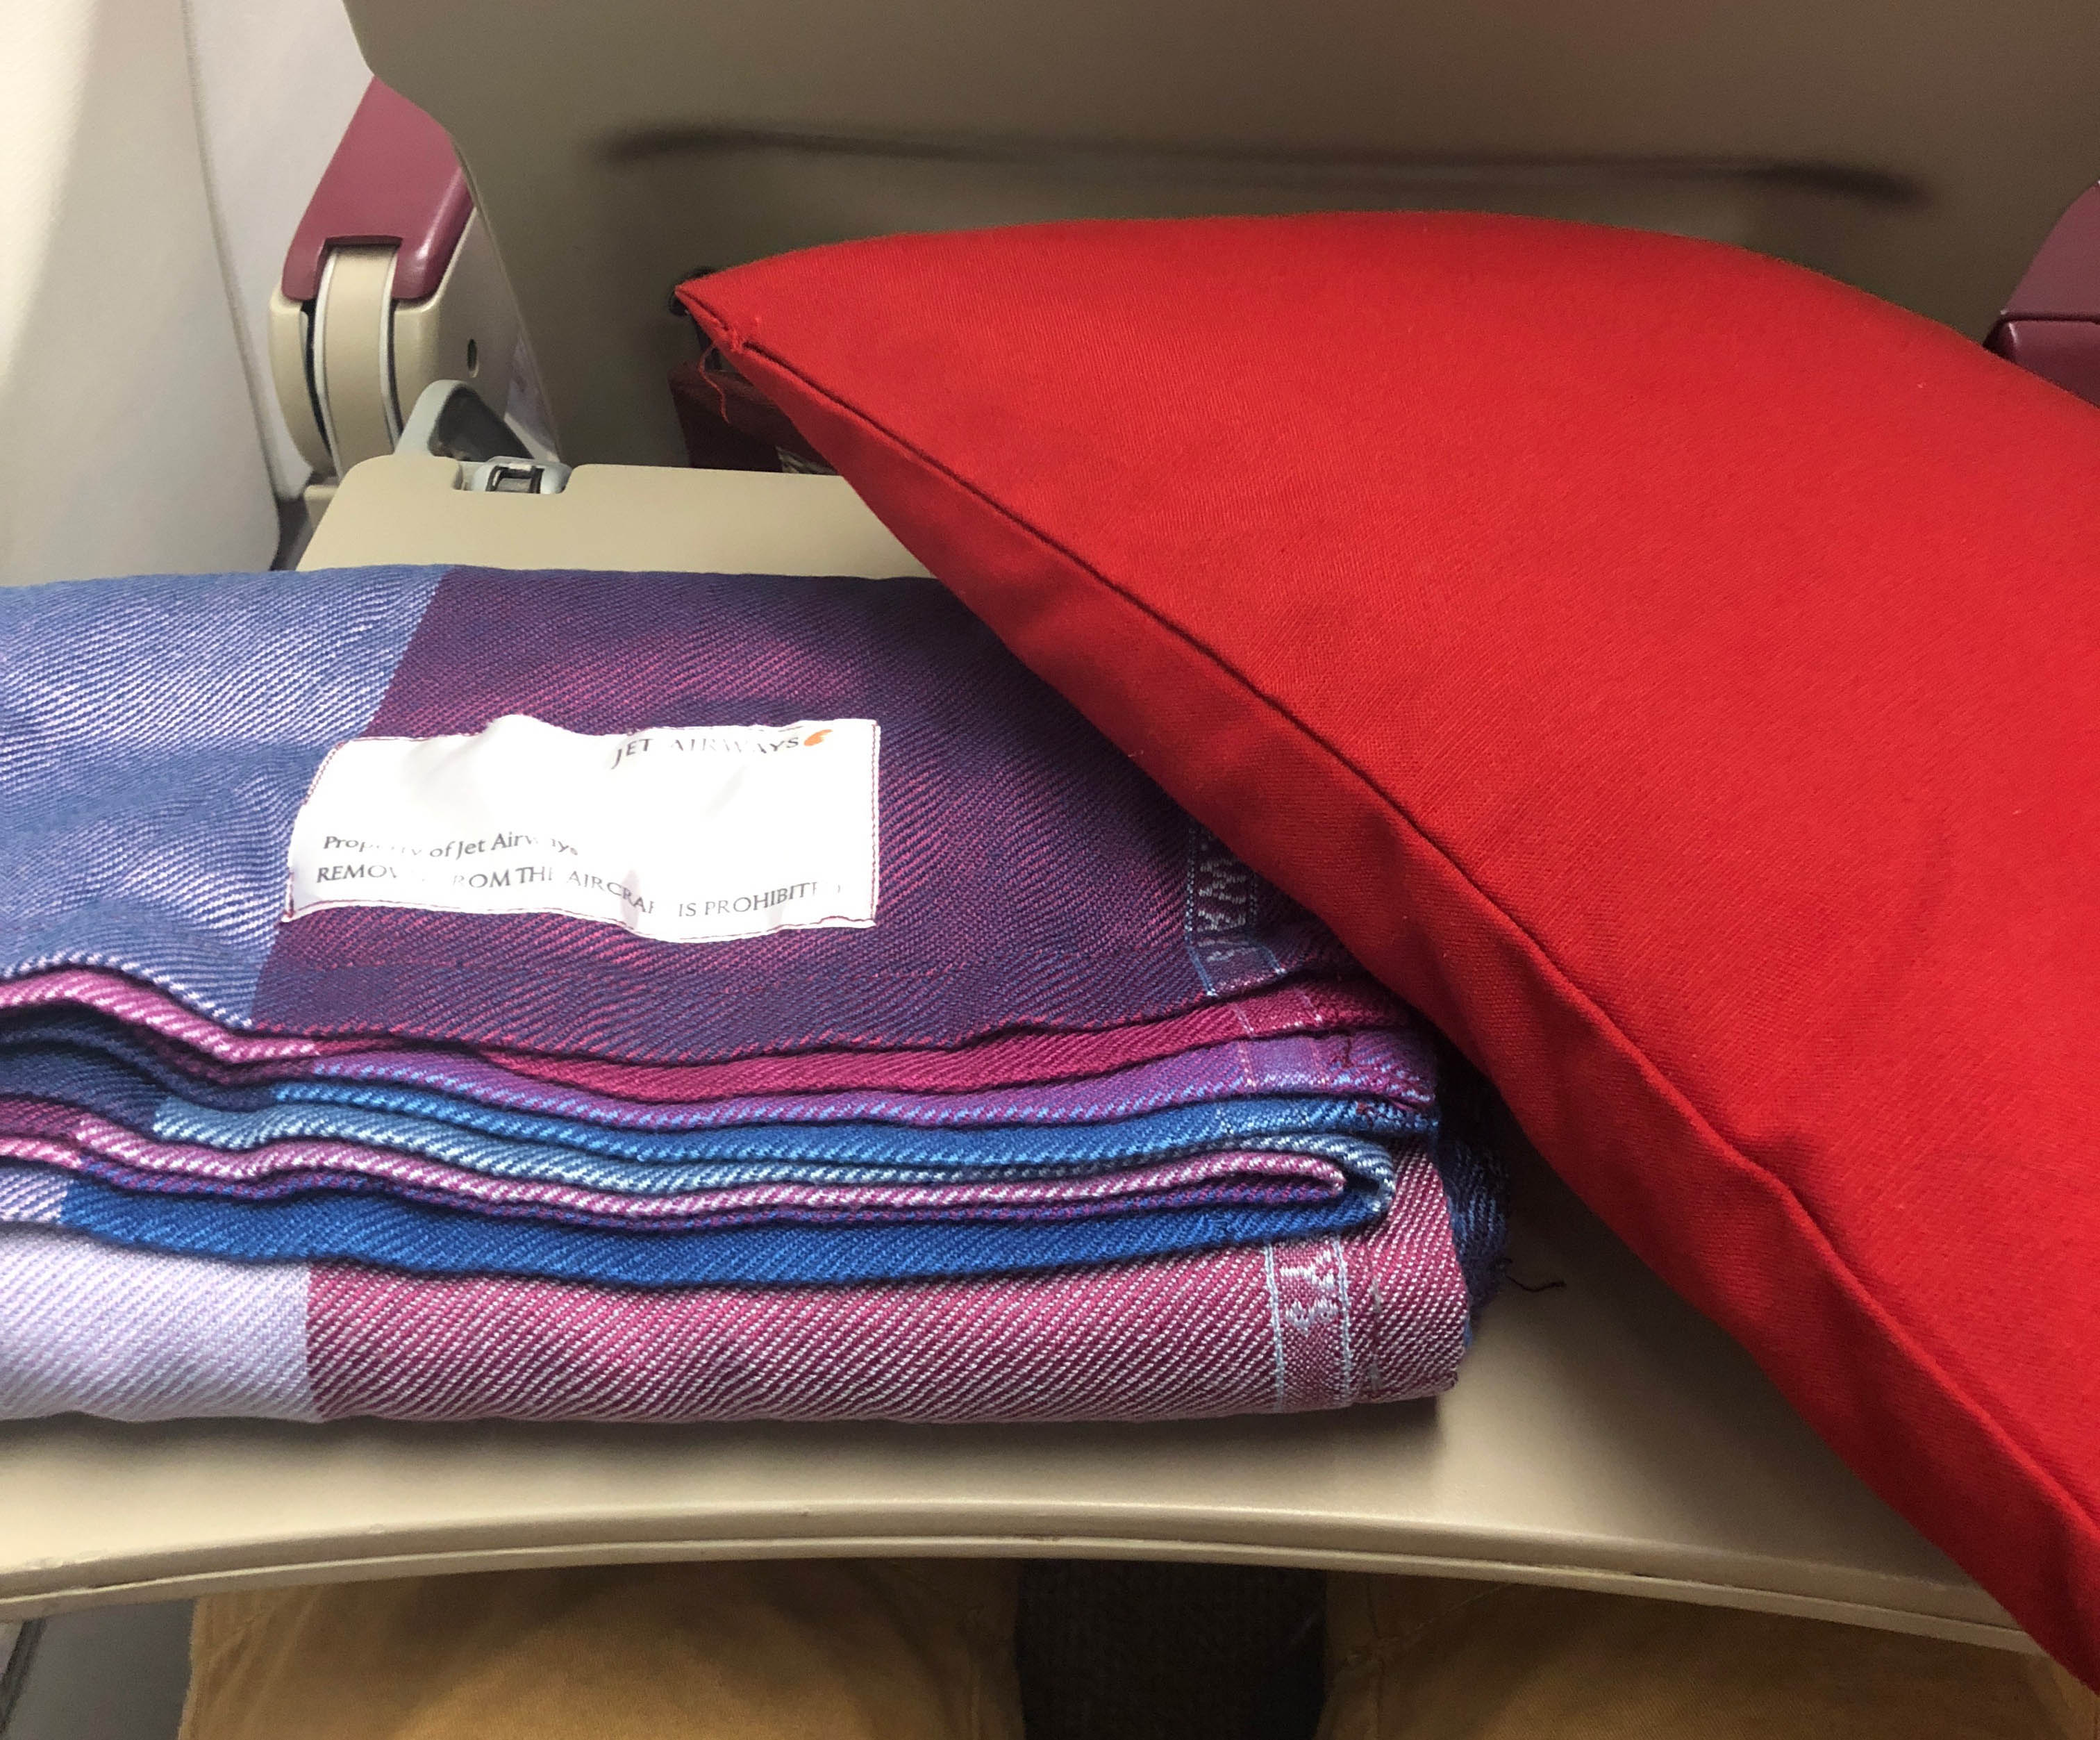 a red pillow and a stack of blankets on a plane